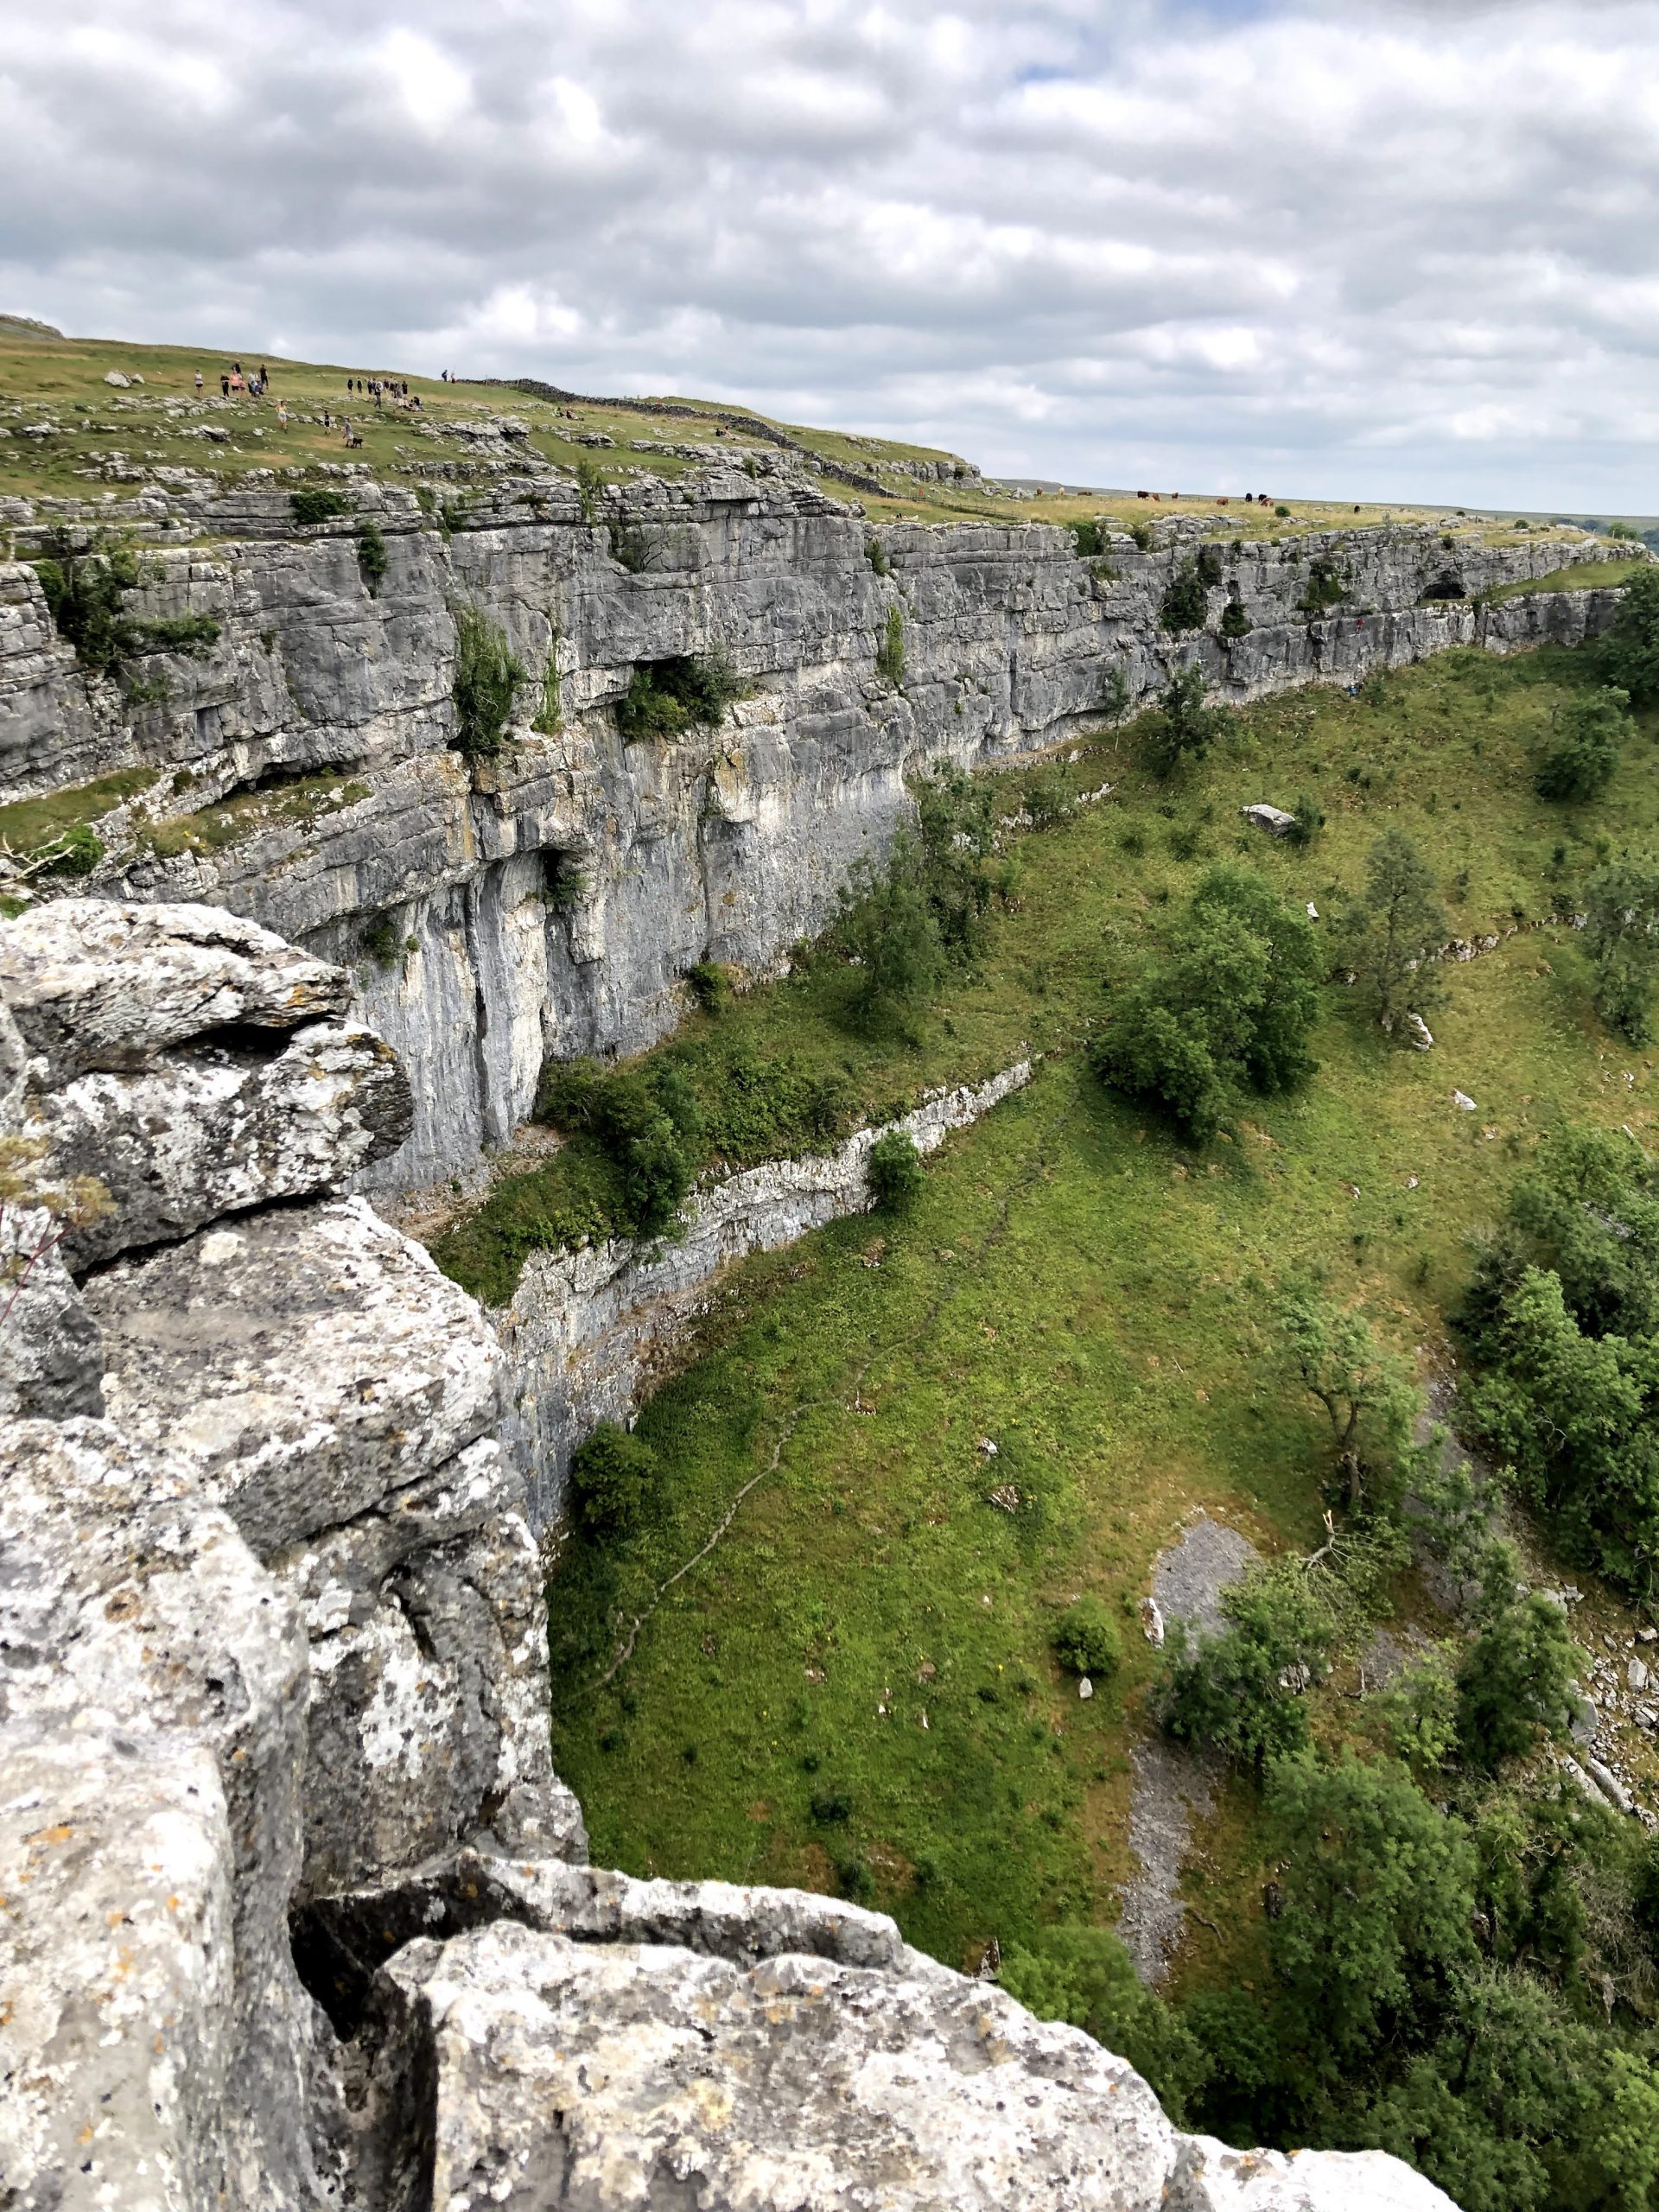 The rocky limestone face of the Malham cove